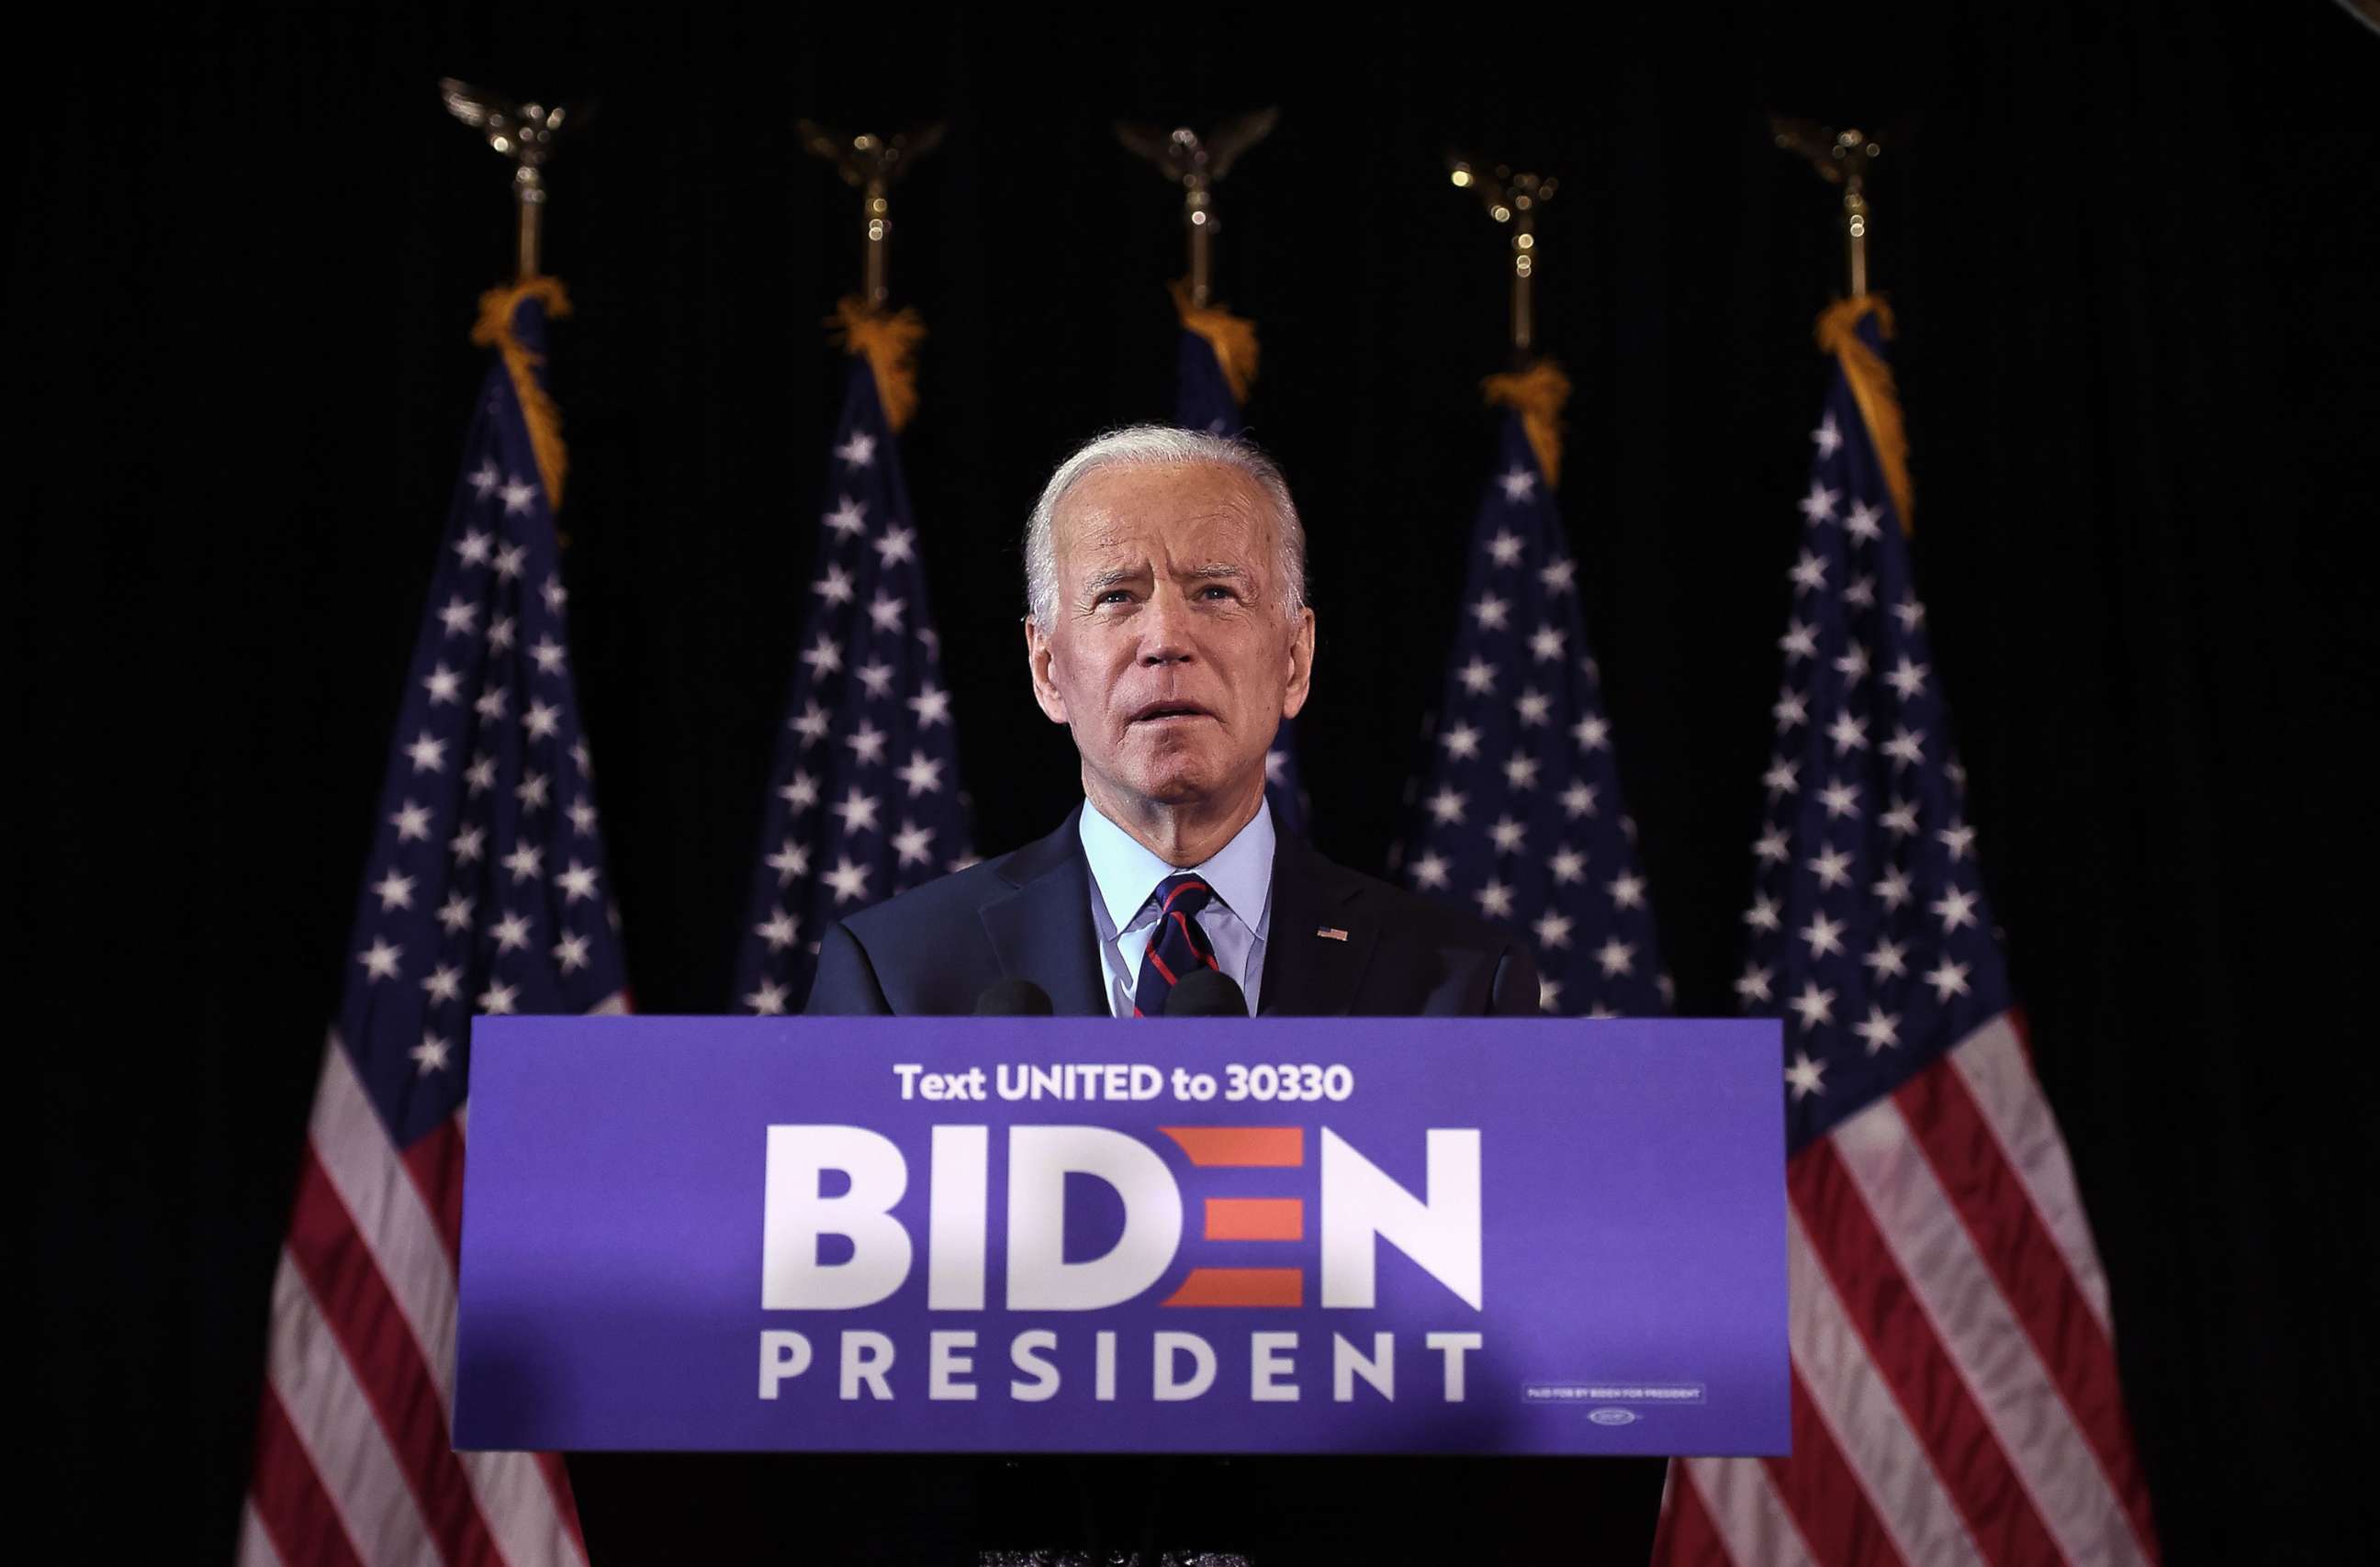 PHOTO: Democratic presidential hopeful Joe Biden makes a statement on Ukraine corruption during a press conference at the Hotel Du Pont on Sept. 23, 2019, in Wilmington, D.E.